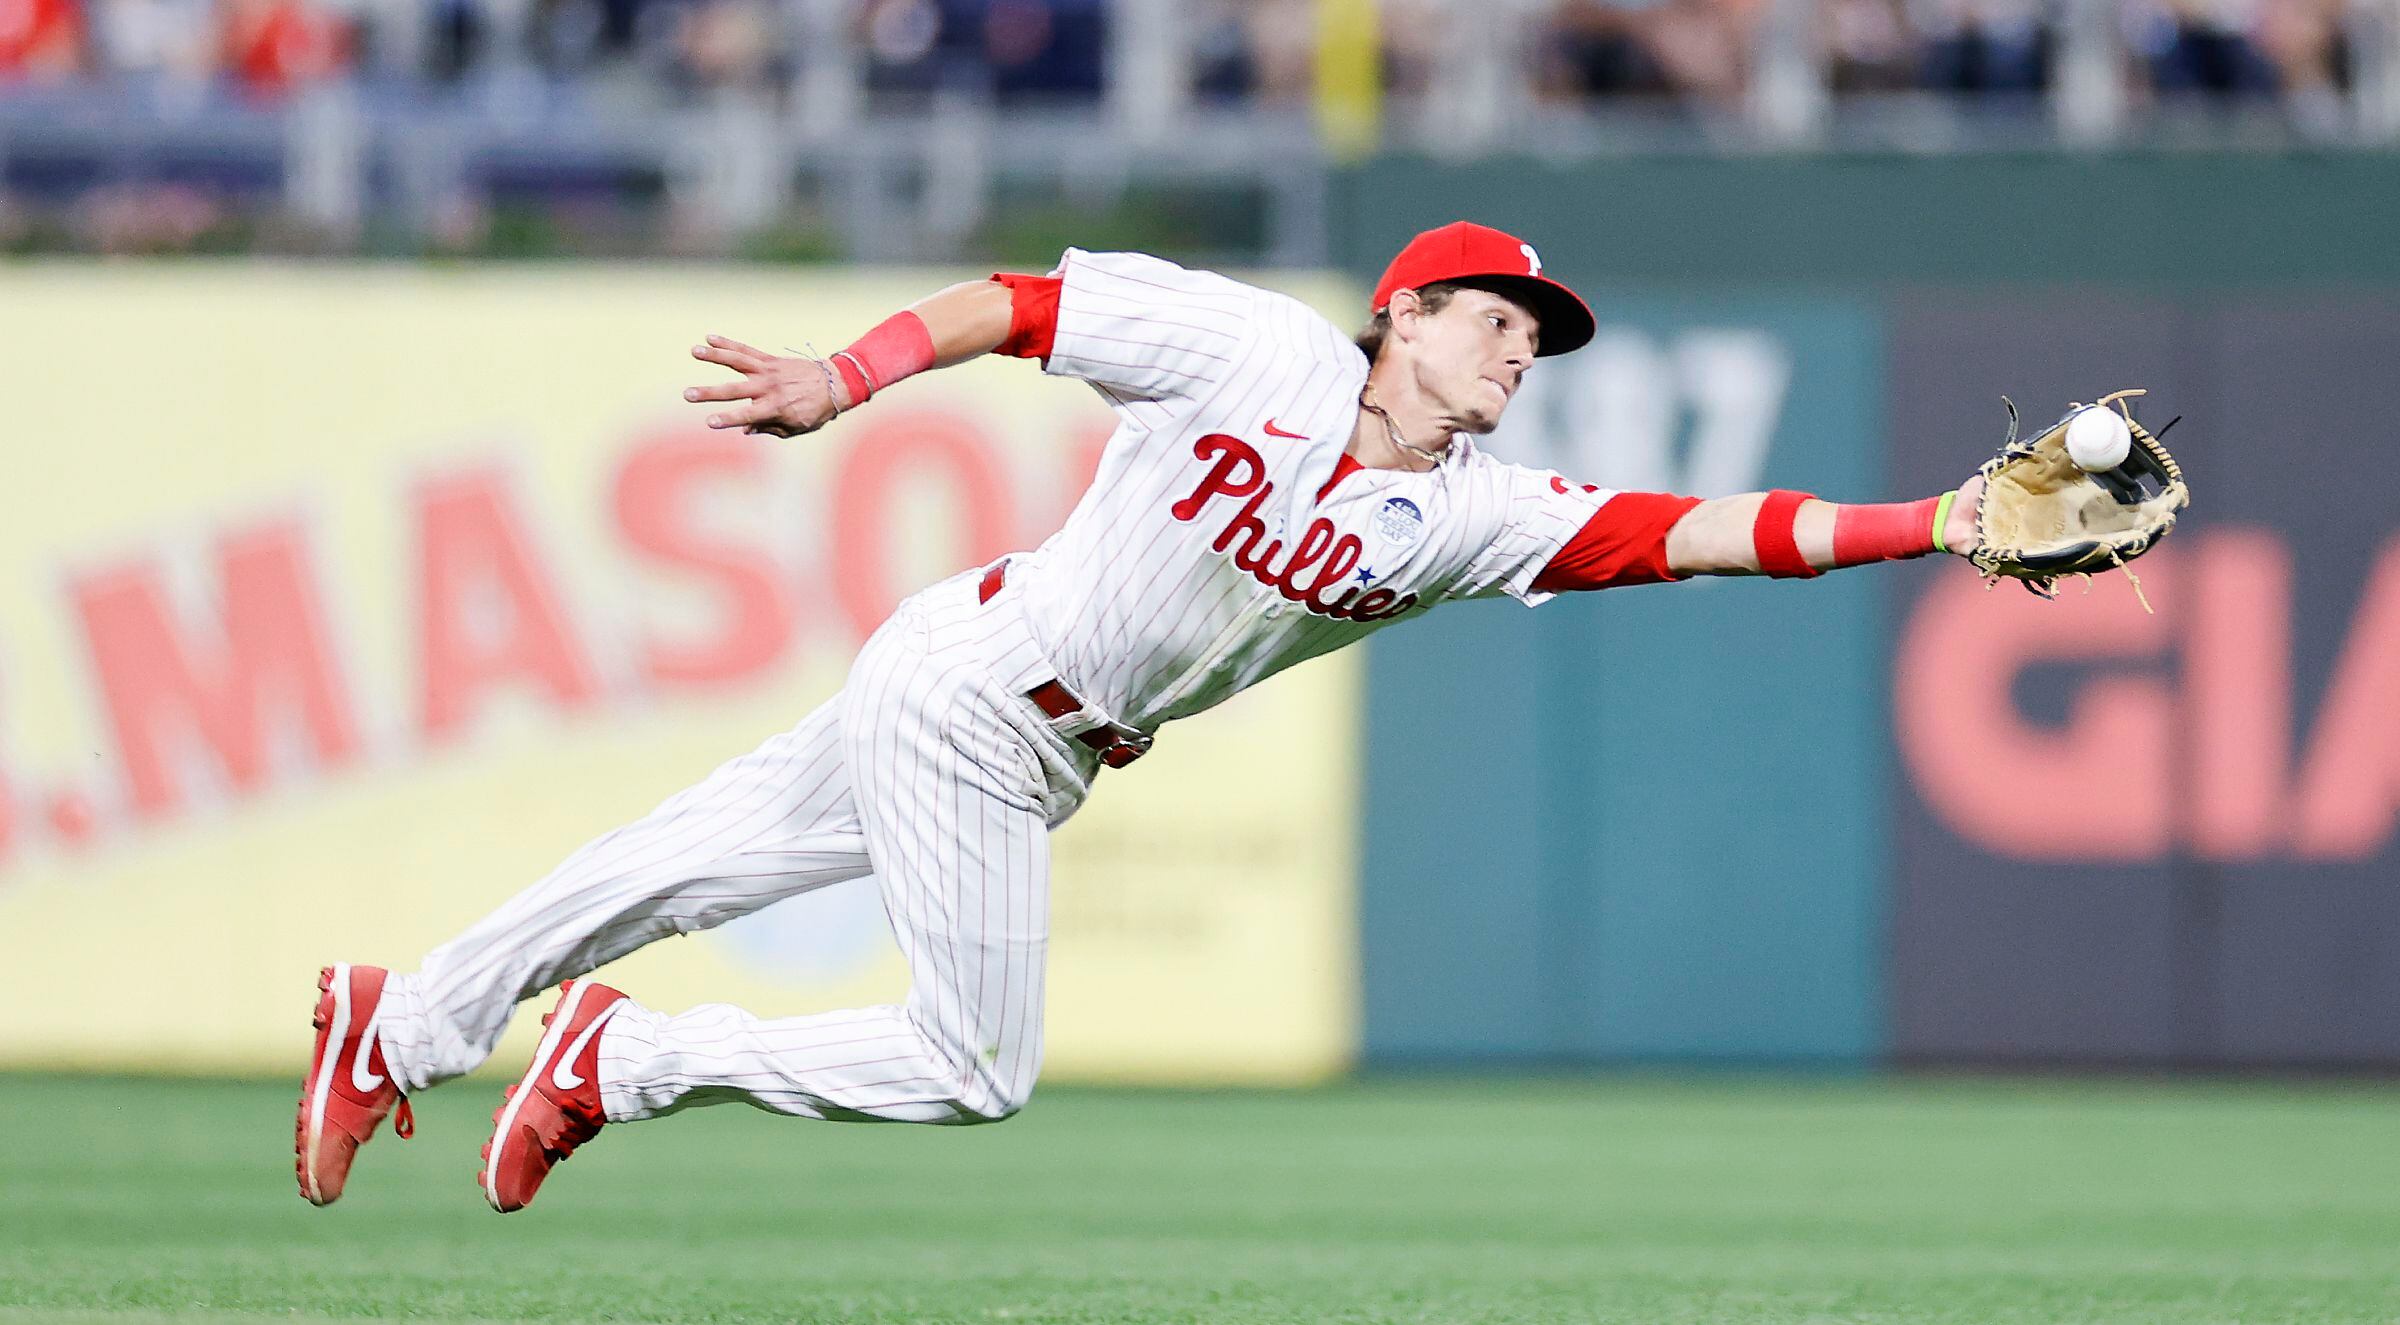 Phillies Notebook:. Realmuto seems ready, but Girardi gives him night off –  Delco Times